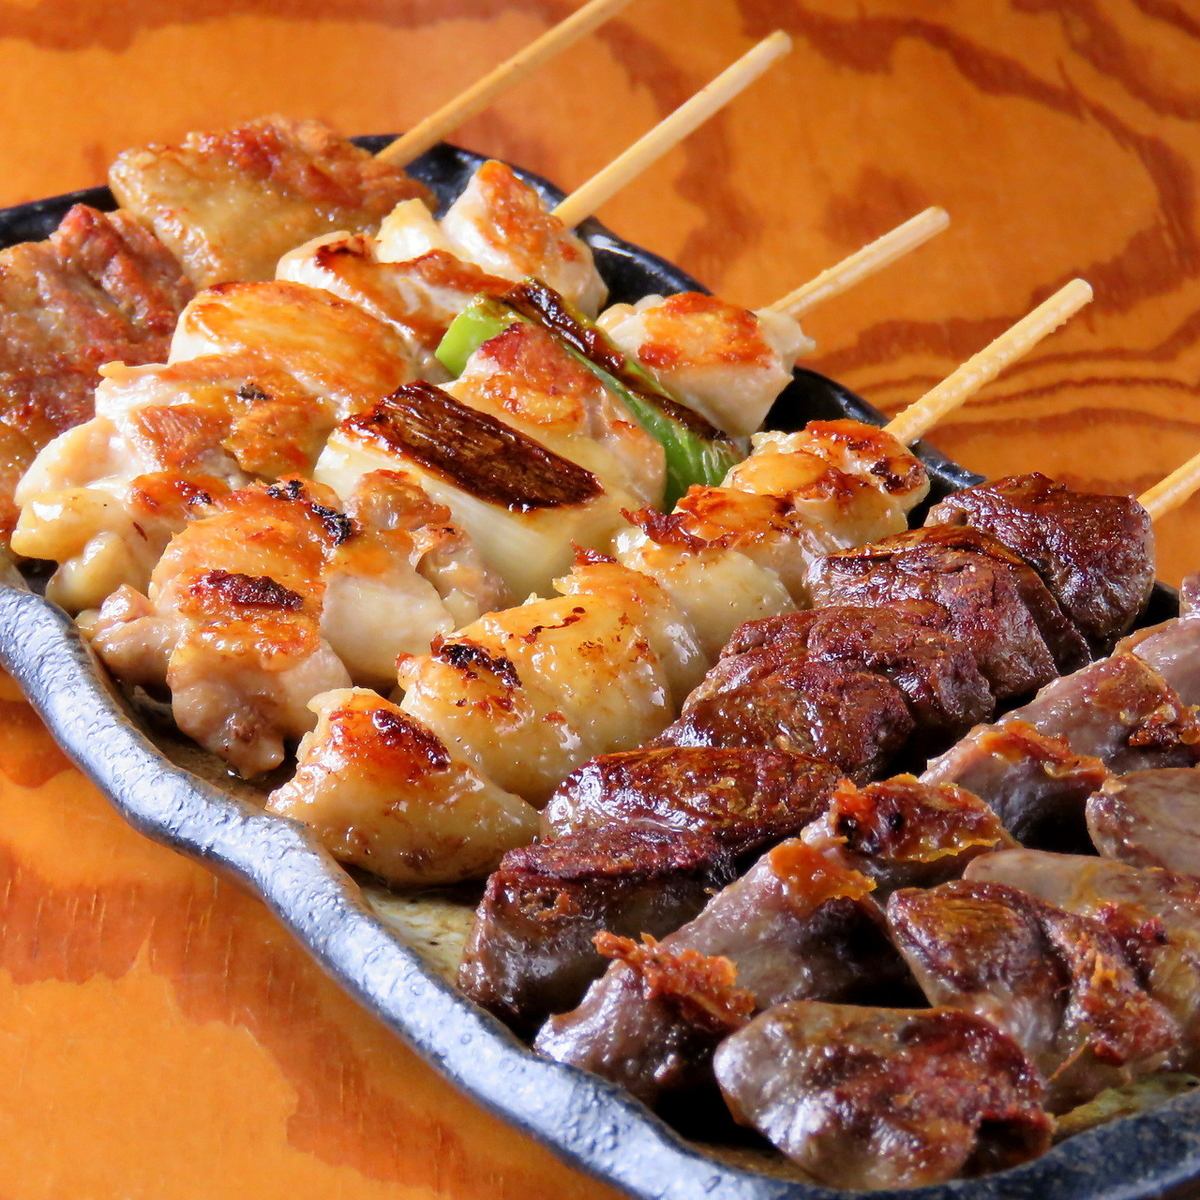 Delicious yakitori and lemon sour! We are waiting for a wide variety of menus!